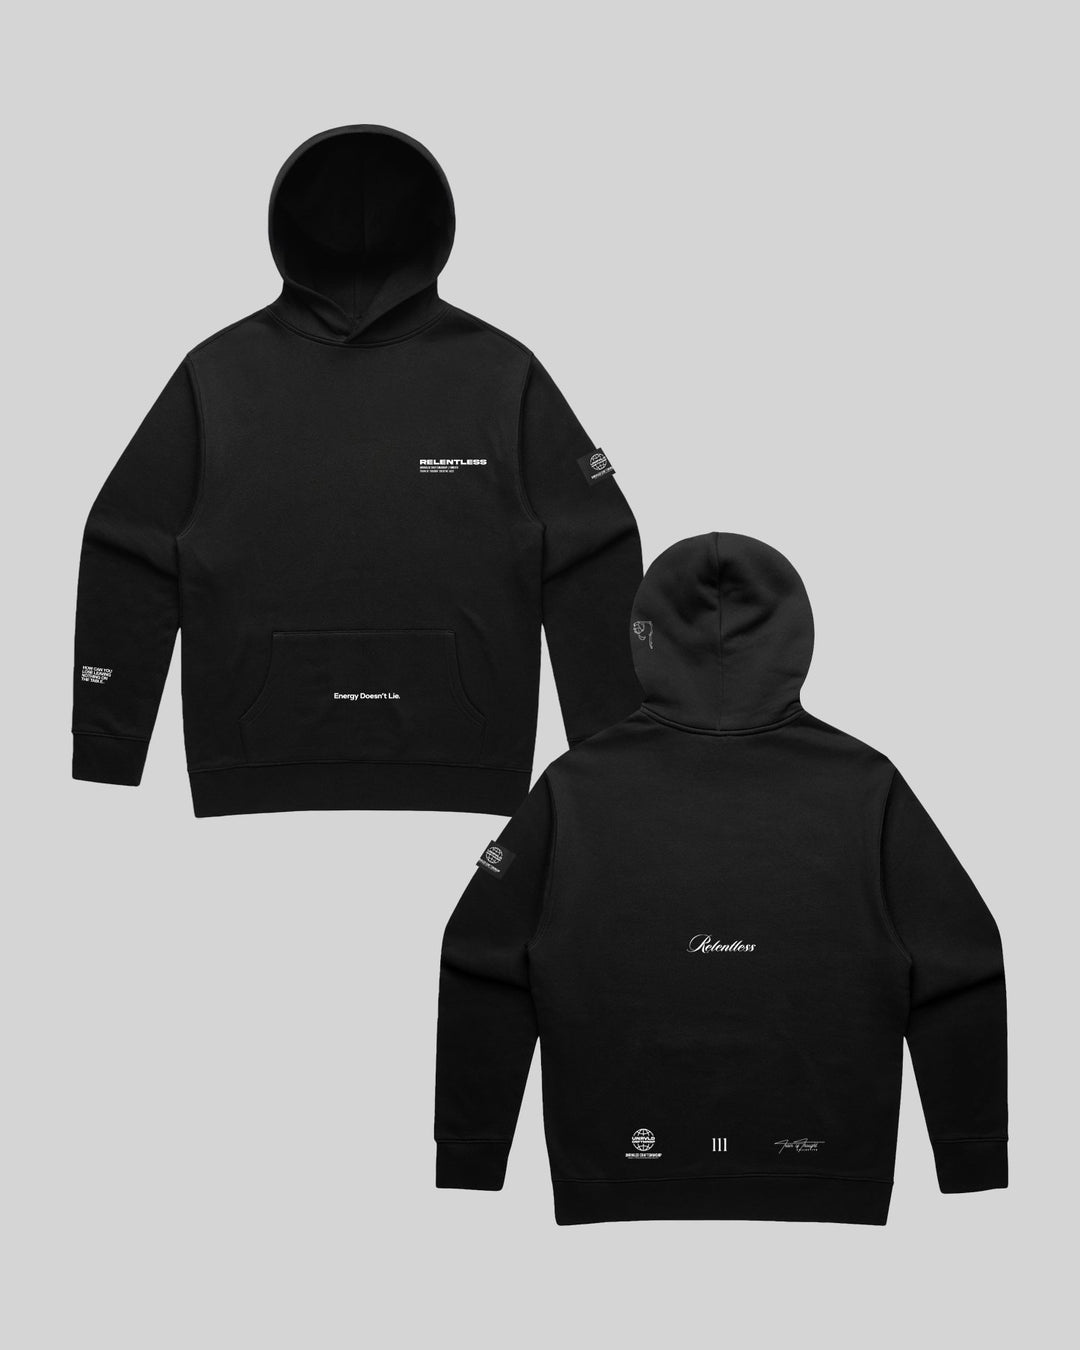 Relentless V1 Premium Black Relaxed Hoodie - trainofthoughtcollective